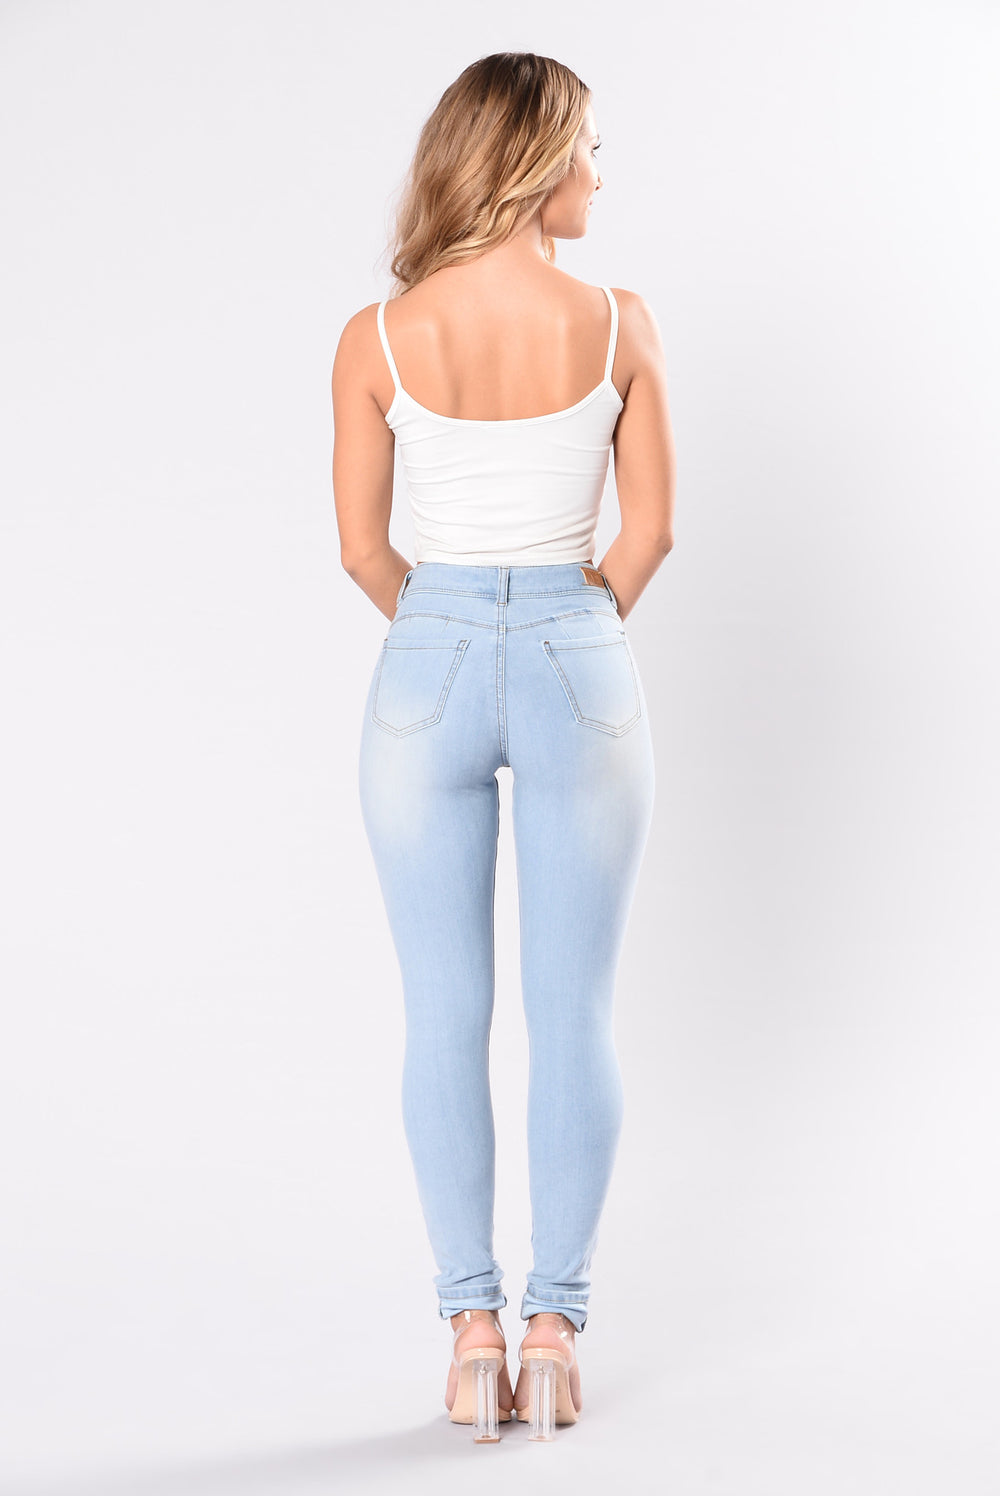 Booty Jeans Ass 78